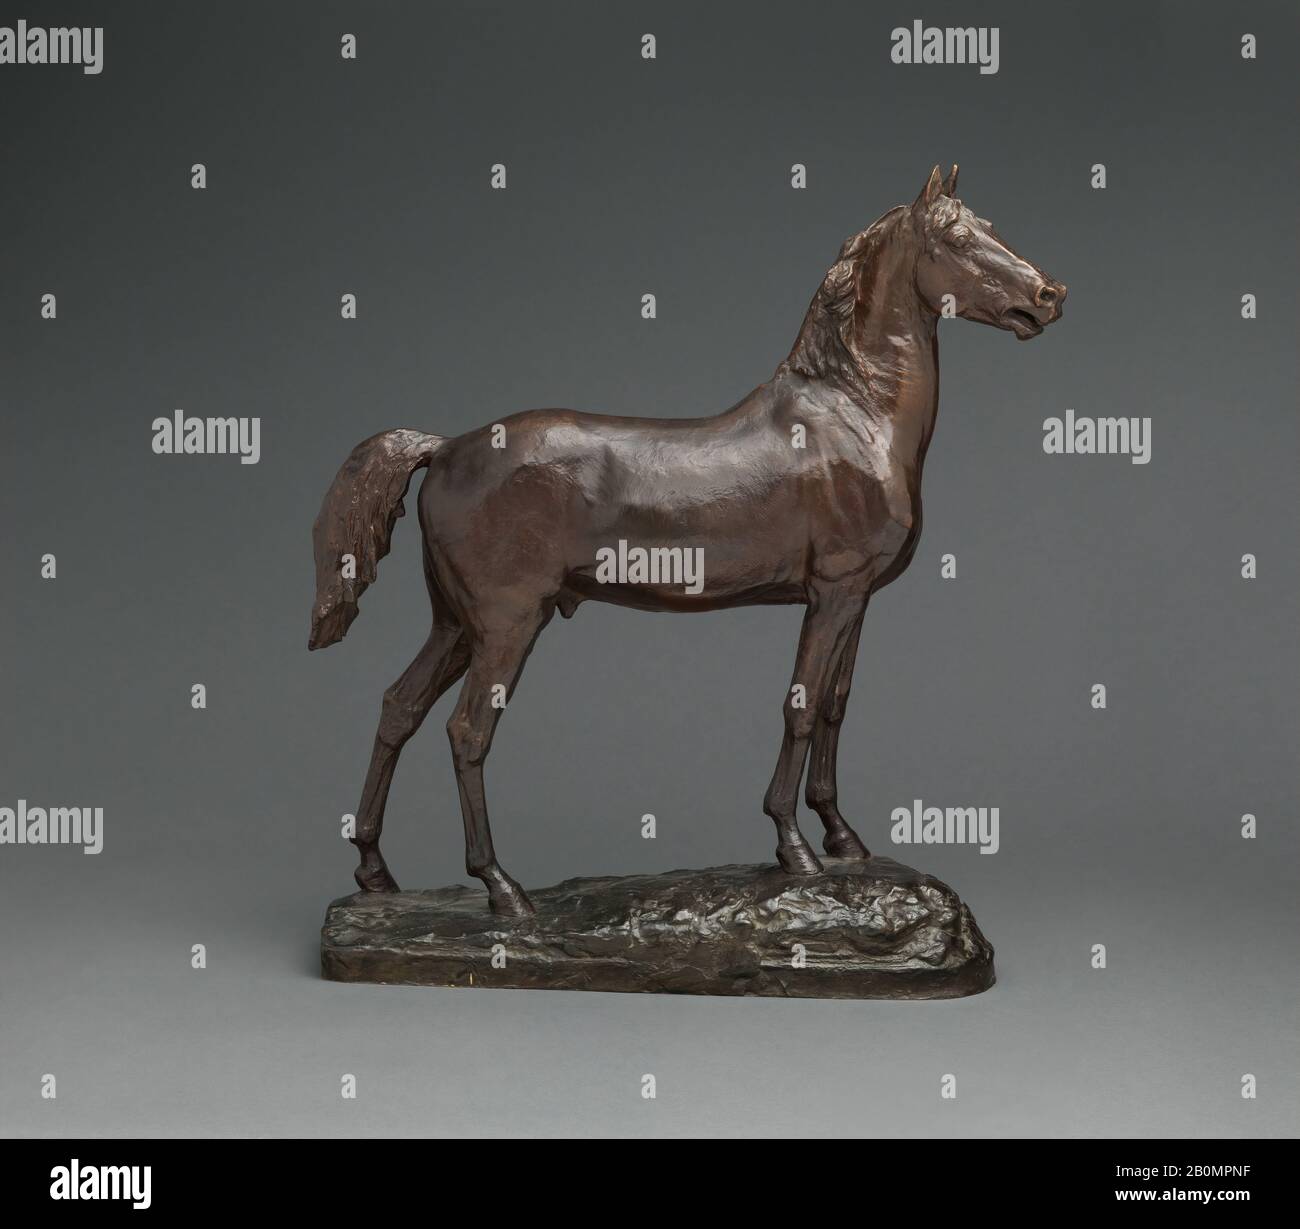 John Quincy Adams Ward, Study of the Horse for the Statue of Major General George Henry Thomas, American, John Quincy Adams Ward (American, Urbana, Ohio 1830–1910 New York), 1879, cast after 1910, American, Bronze, 20 x 18 x 5 in. (50.8 x 45.7 x 12.7 cm), Sculpture Stock Photo